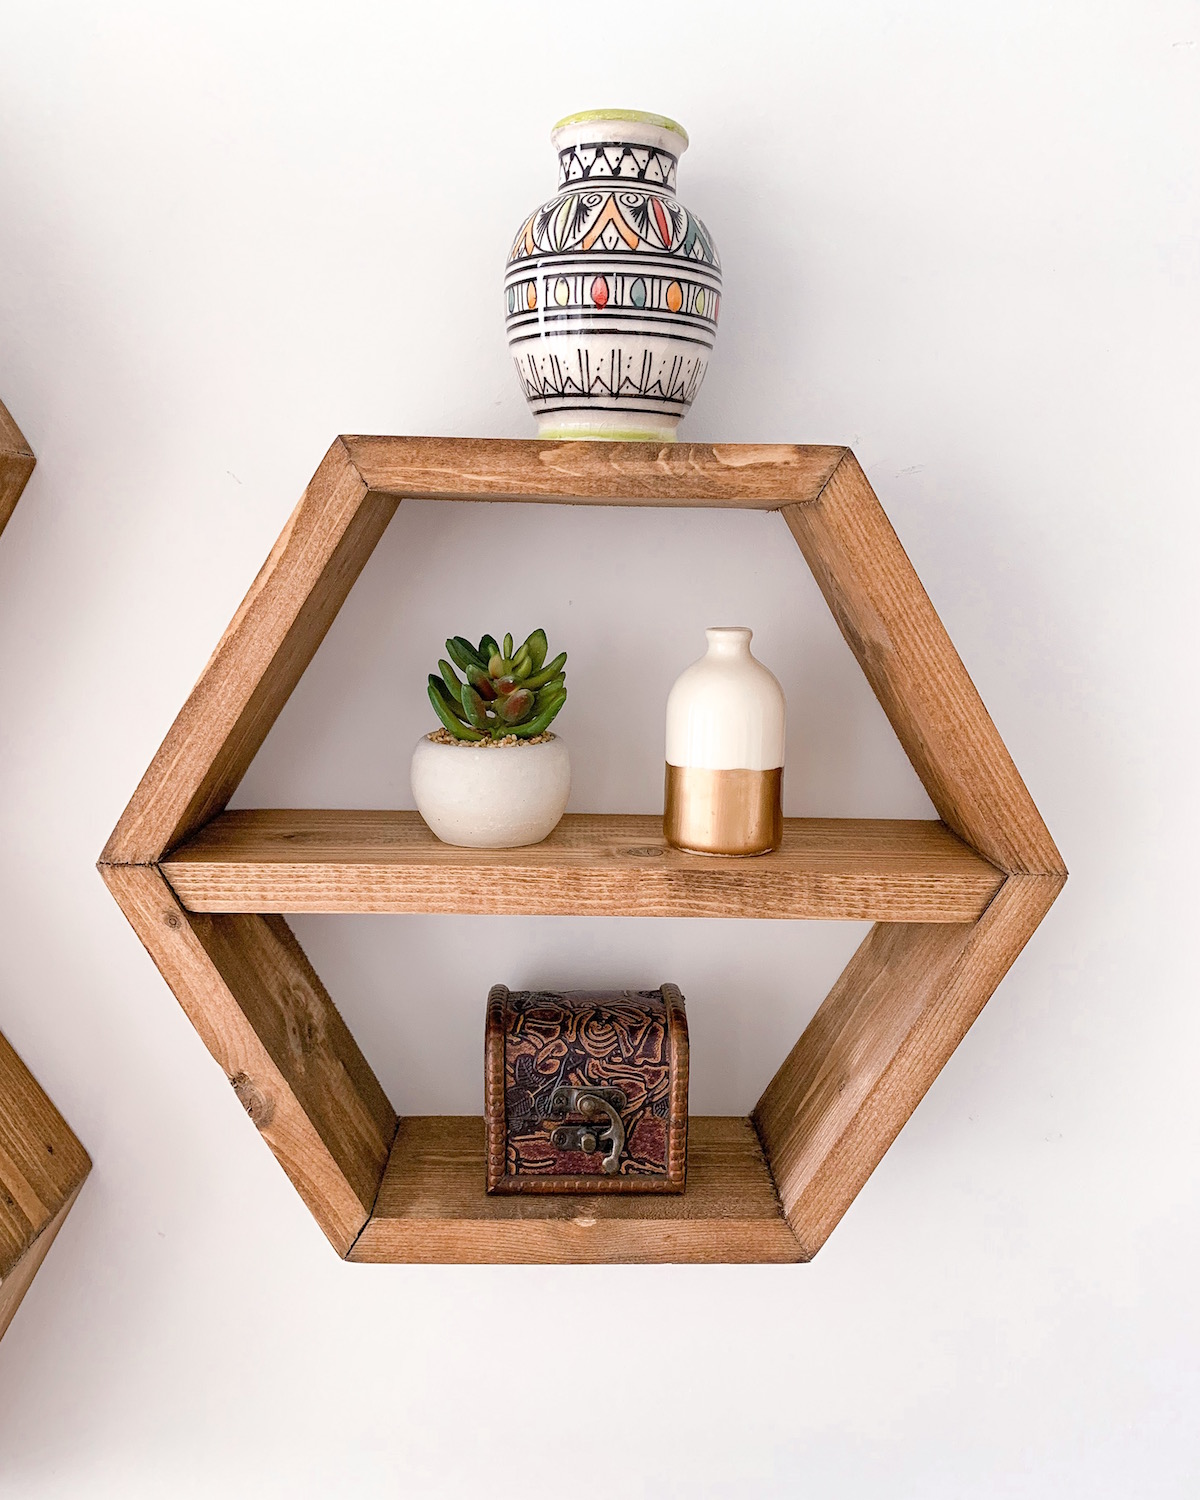 How To Decorate Honeycomb Shelves